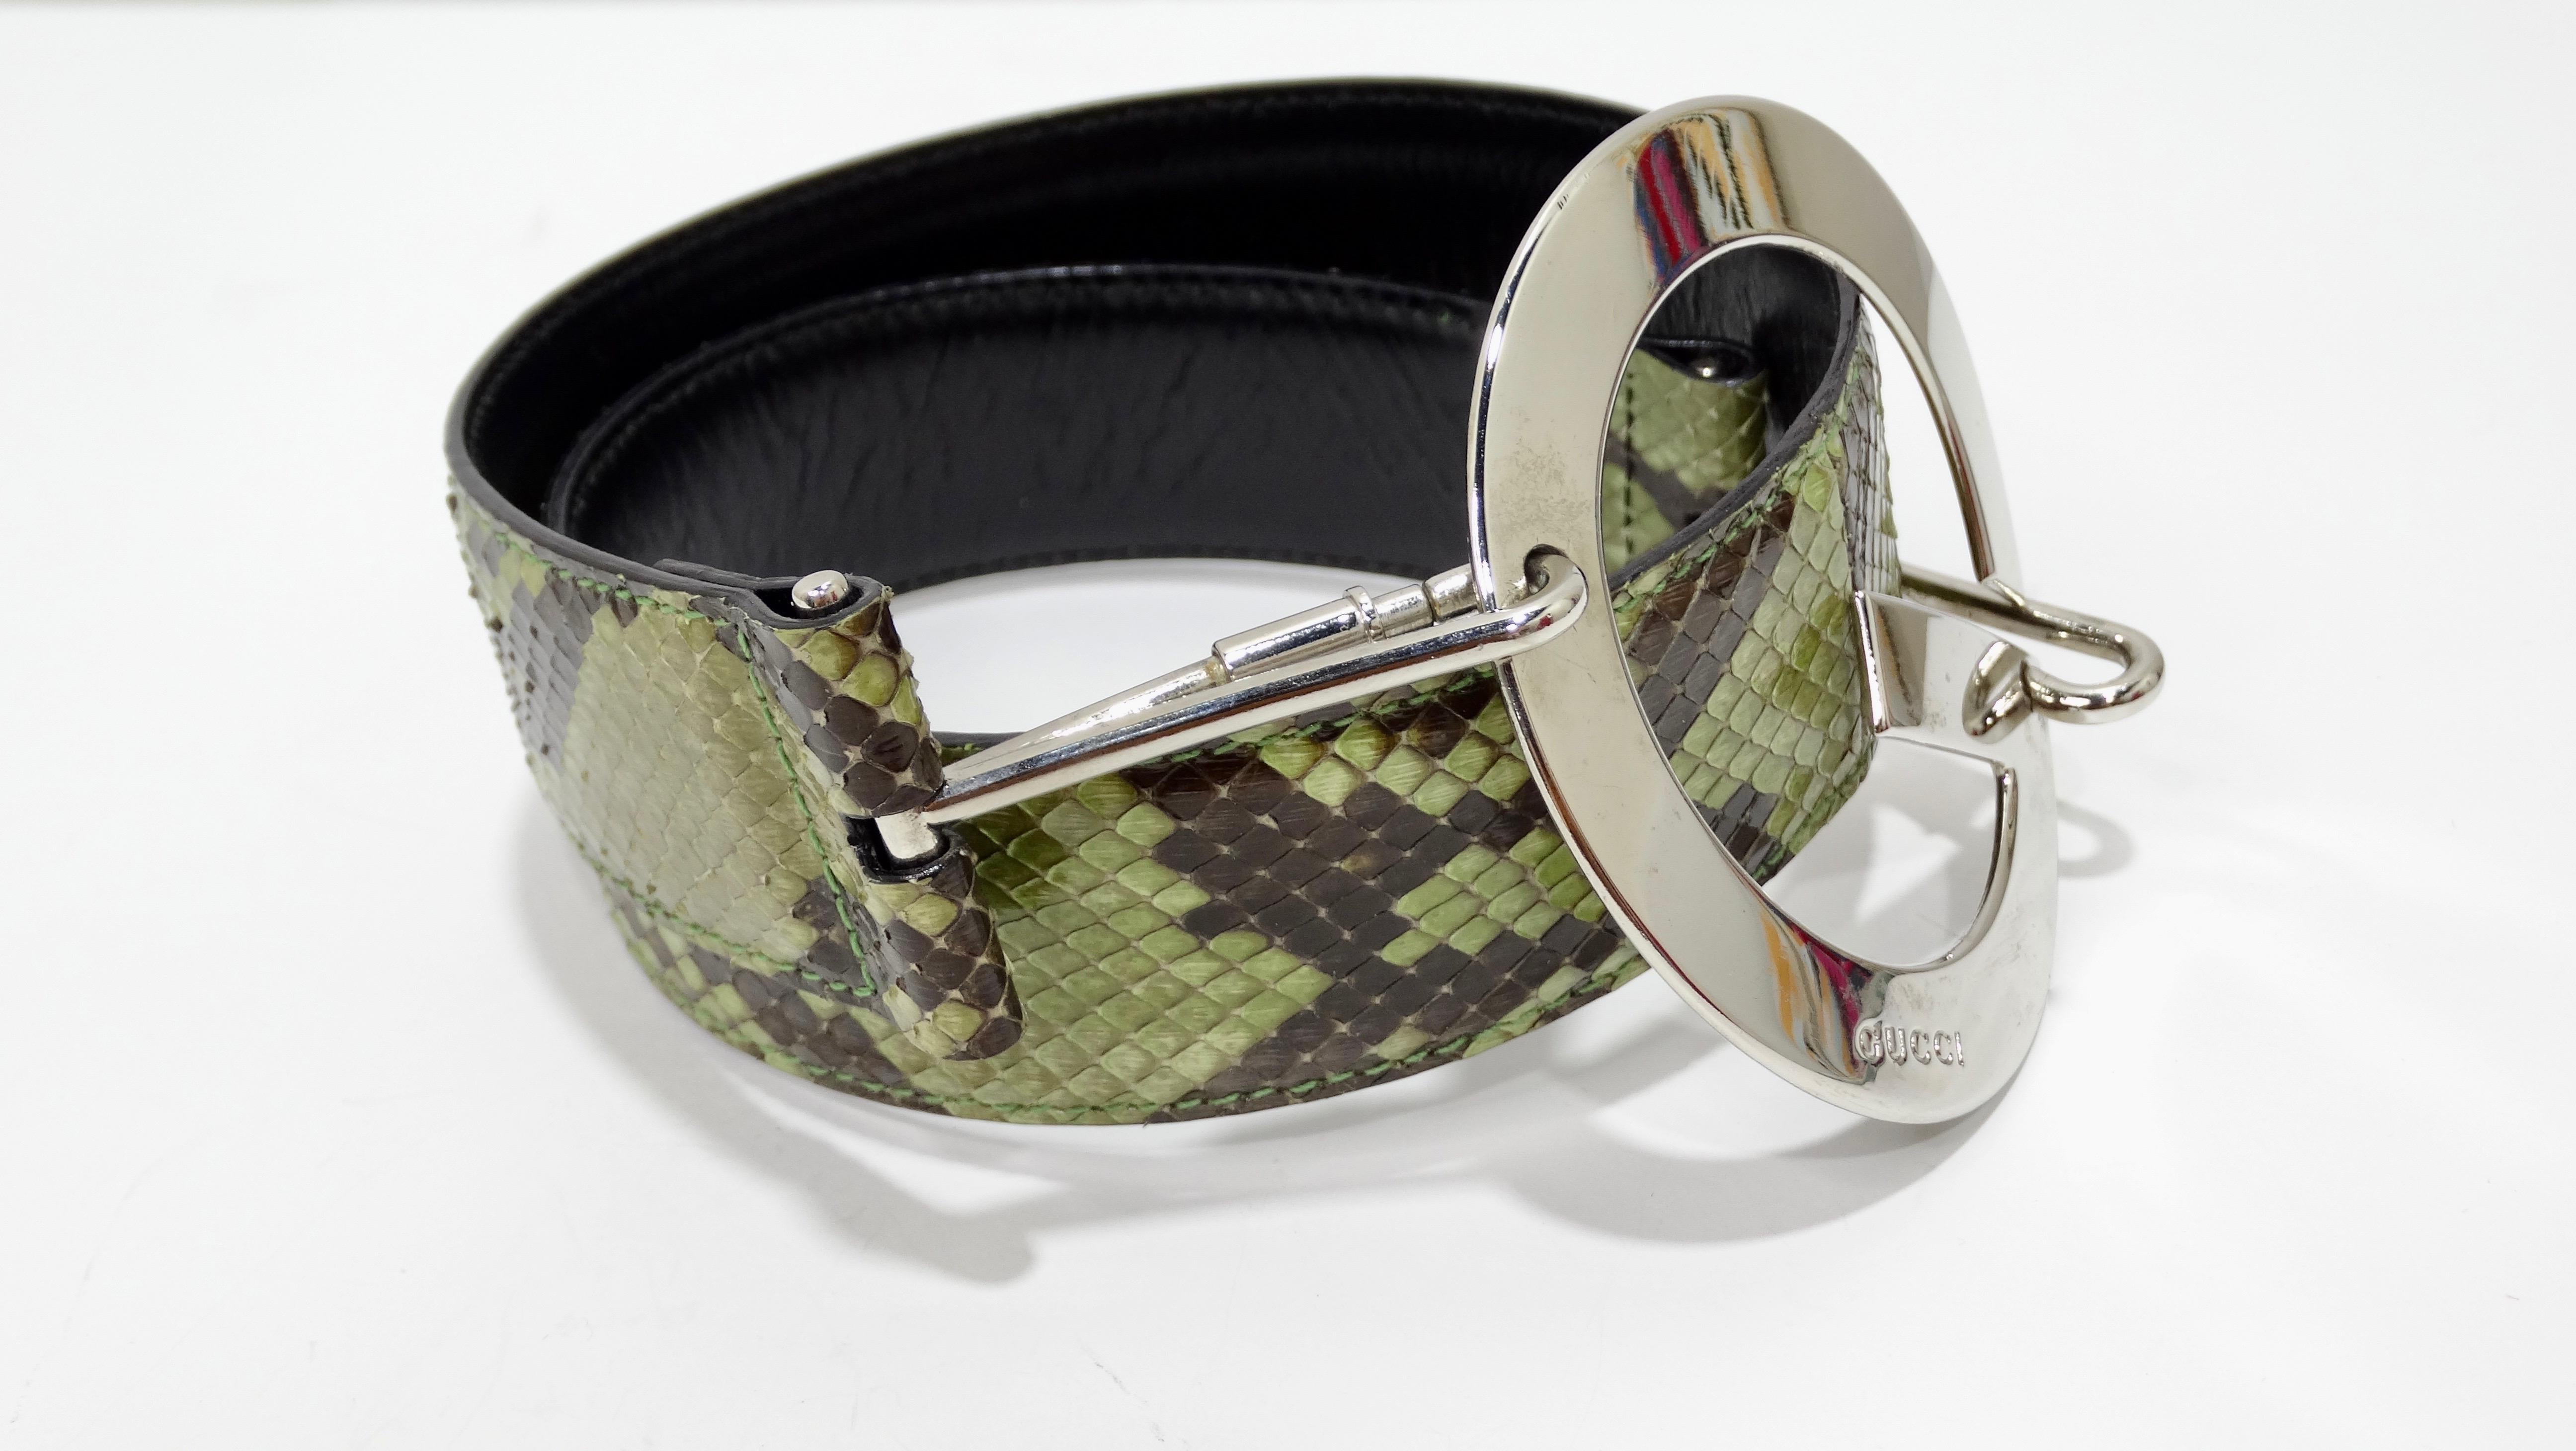 Spice up your looks with this amazing Tom Ford for Gucci belt! Circa late 90s/early 2000s, this belt is crafted from olive green and brown snakeskin and features carabiner closures and a large silver-tone 